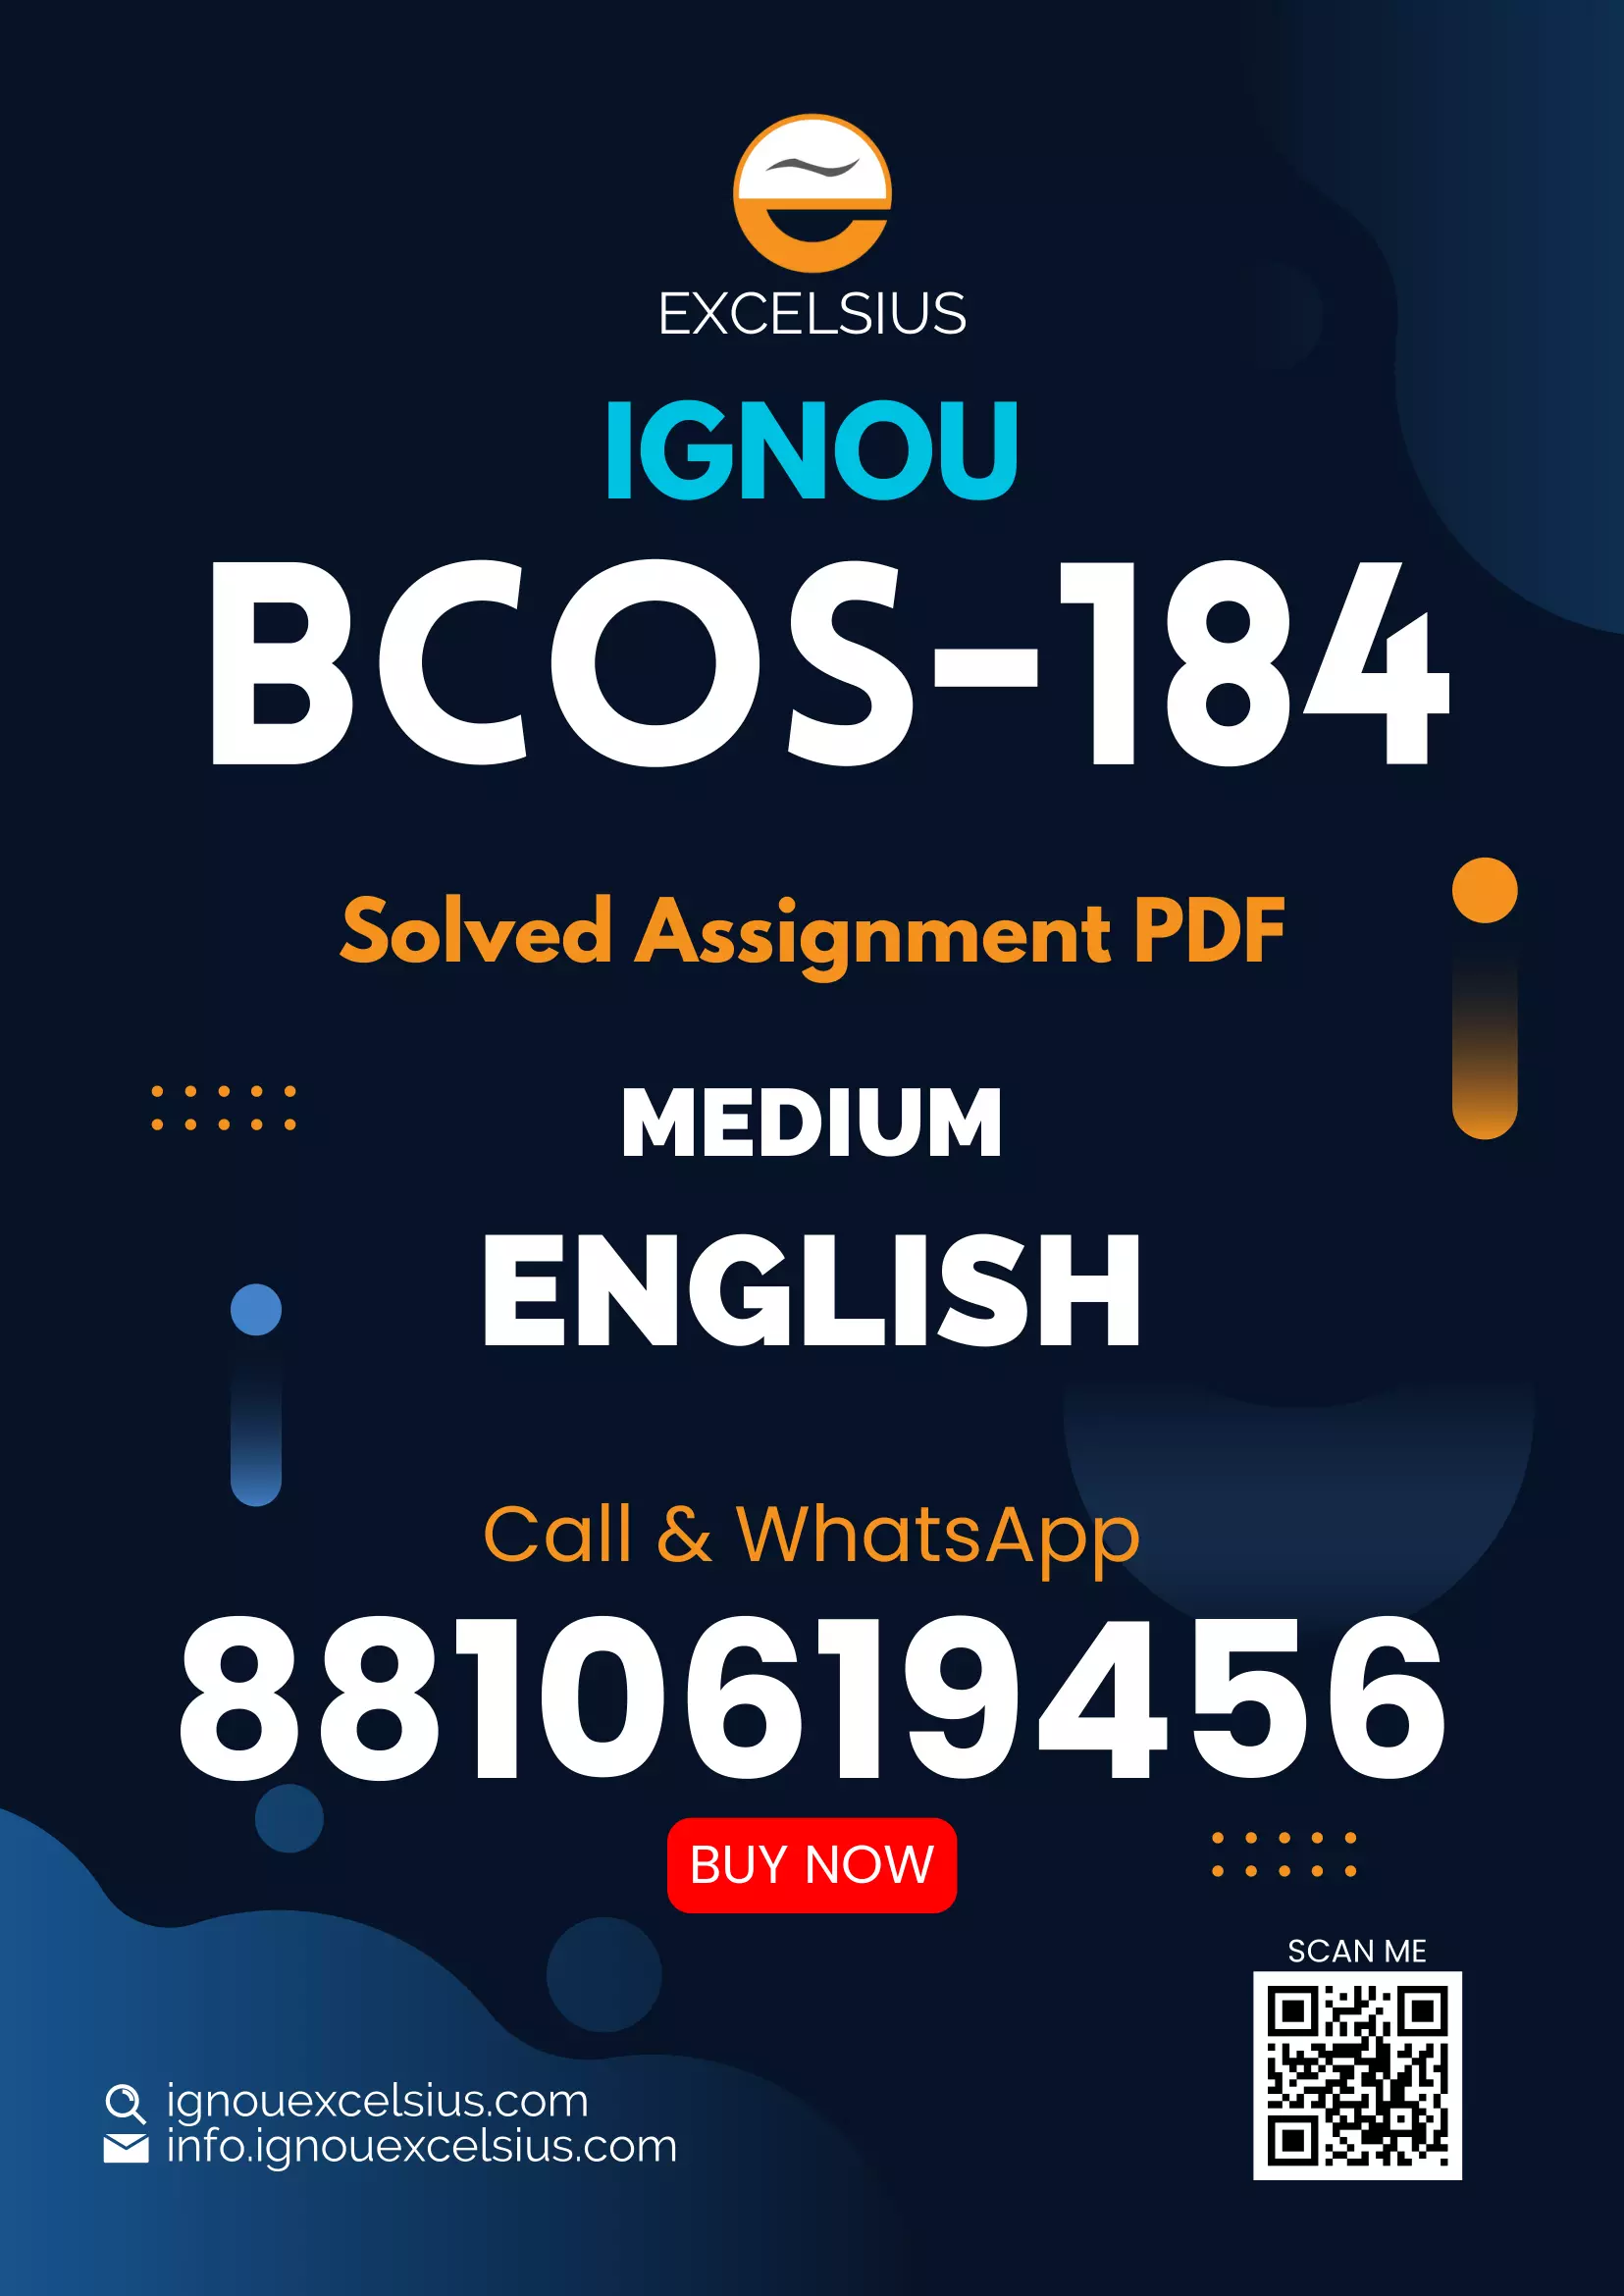 IGNOU BCOS-184 - E-Commerce, Latest Solved Assignment-July 2022 – January 2023